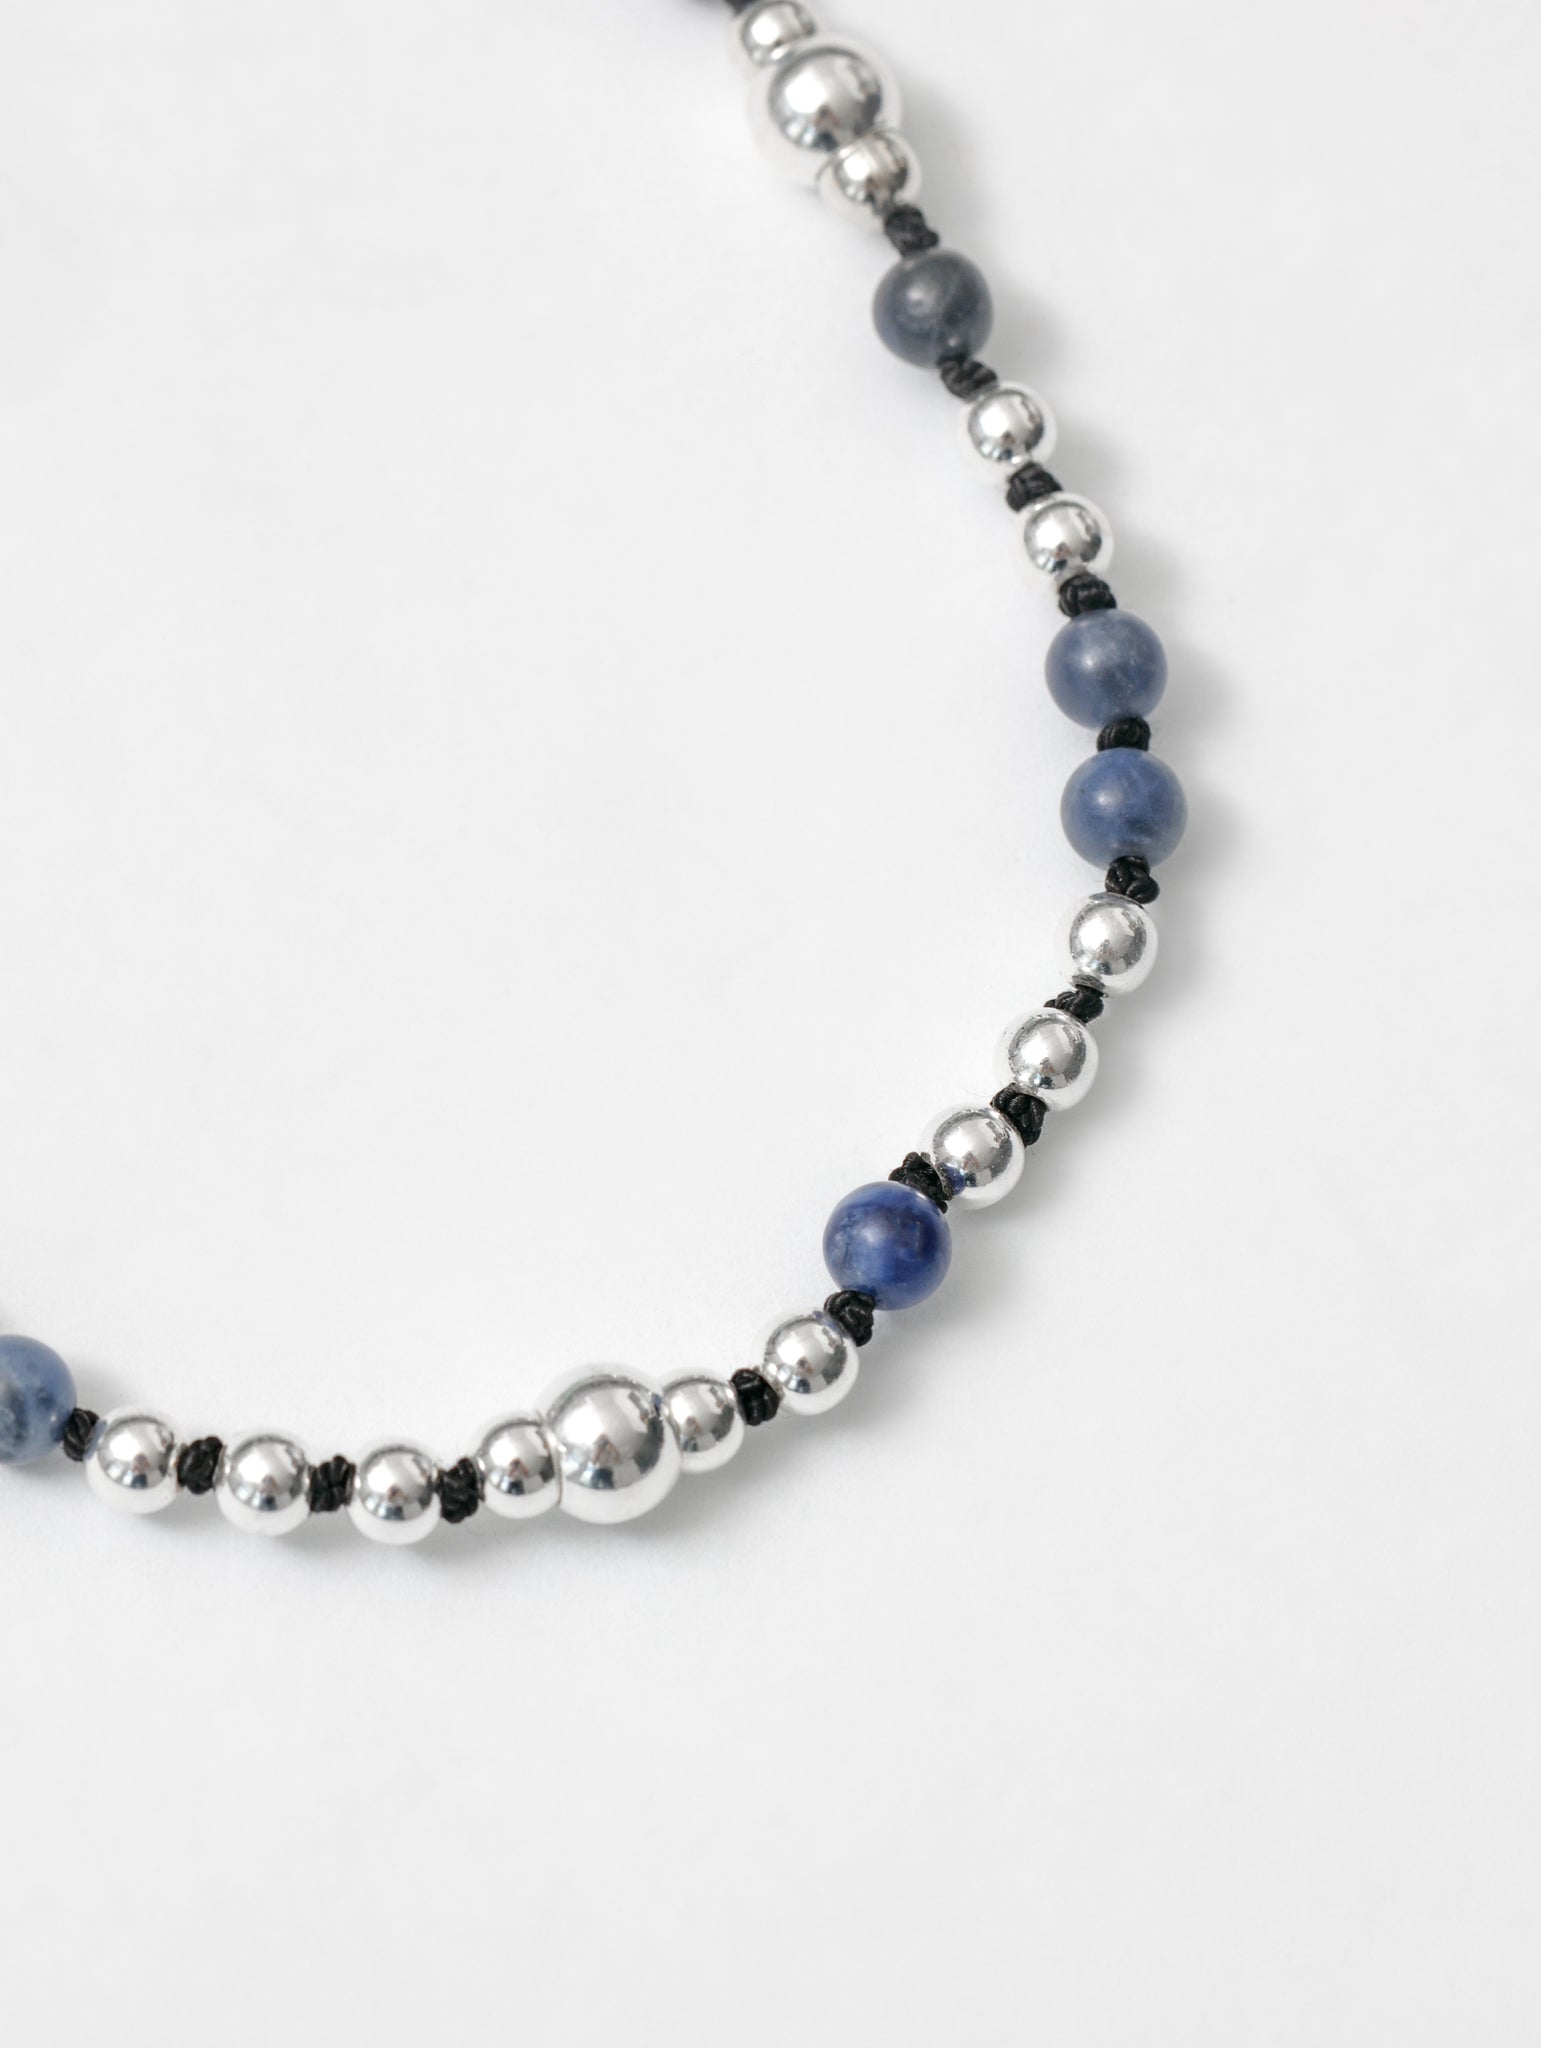 Wolf Circus Unique Unisex Knotted Bead Necklace Blue Natural Gemstone 925 Sterling Silver Jewelry